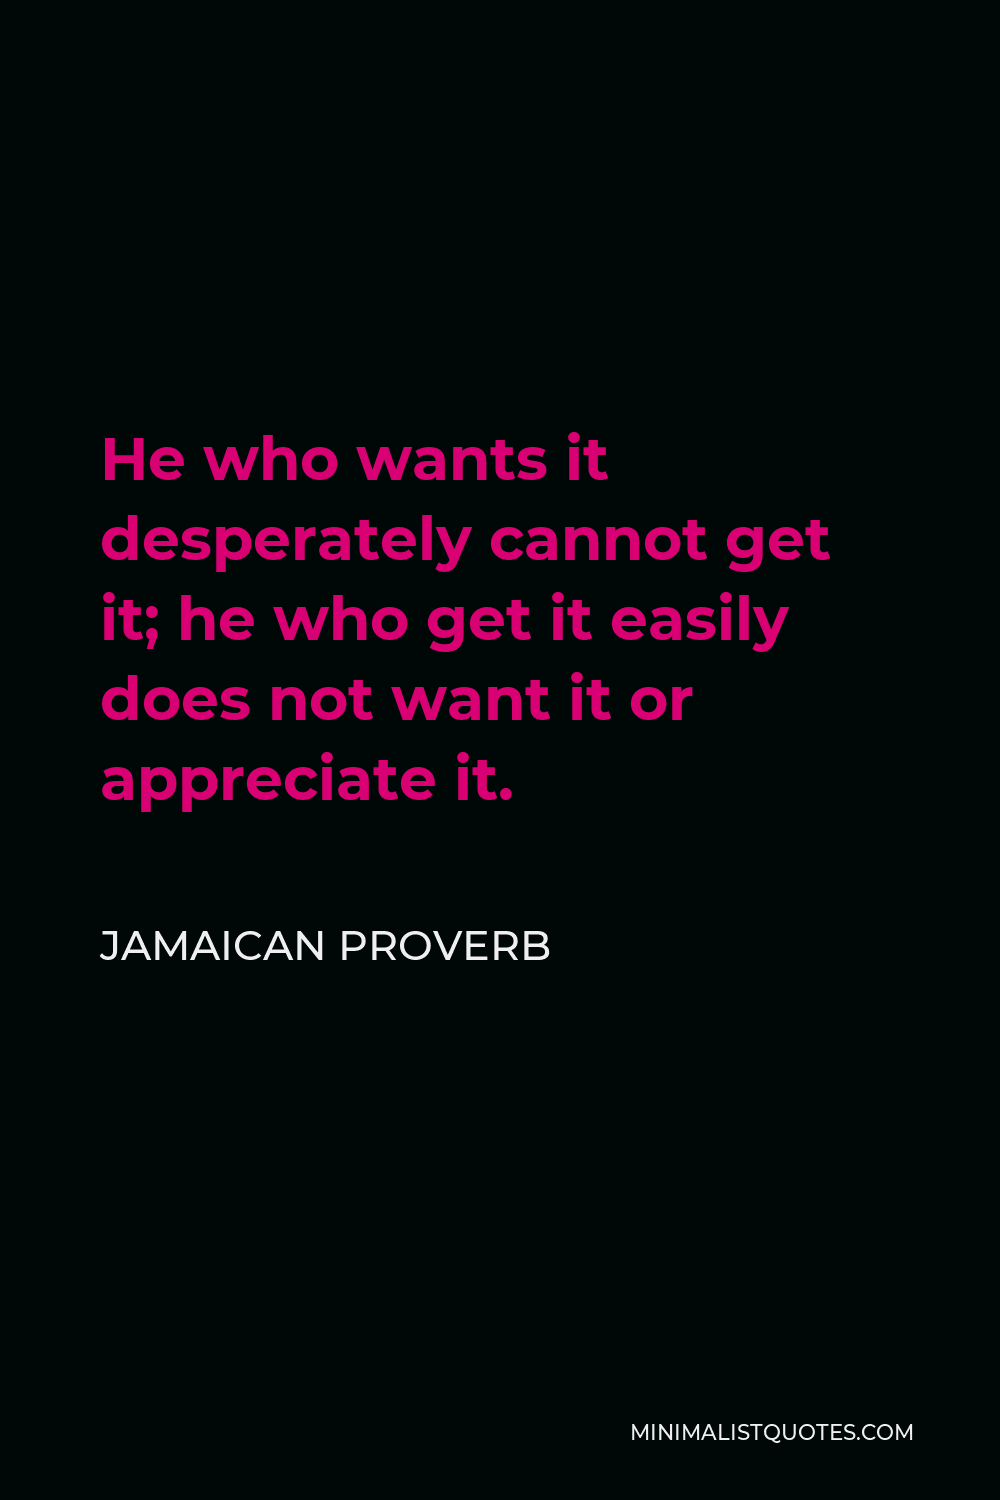 Jamaican Proverb Quote - He who wants it desperately cannot get it; he who get it easily does not want it or appreciate it.